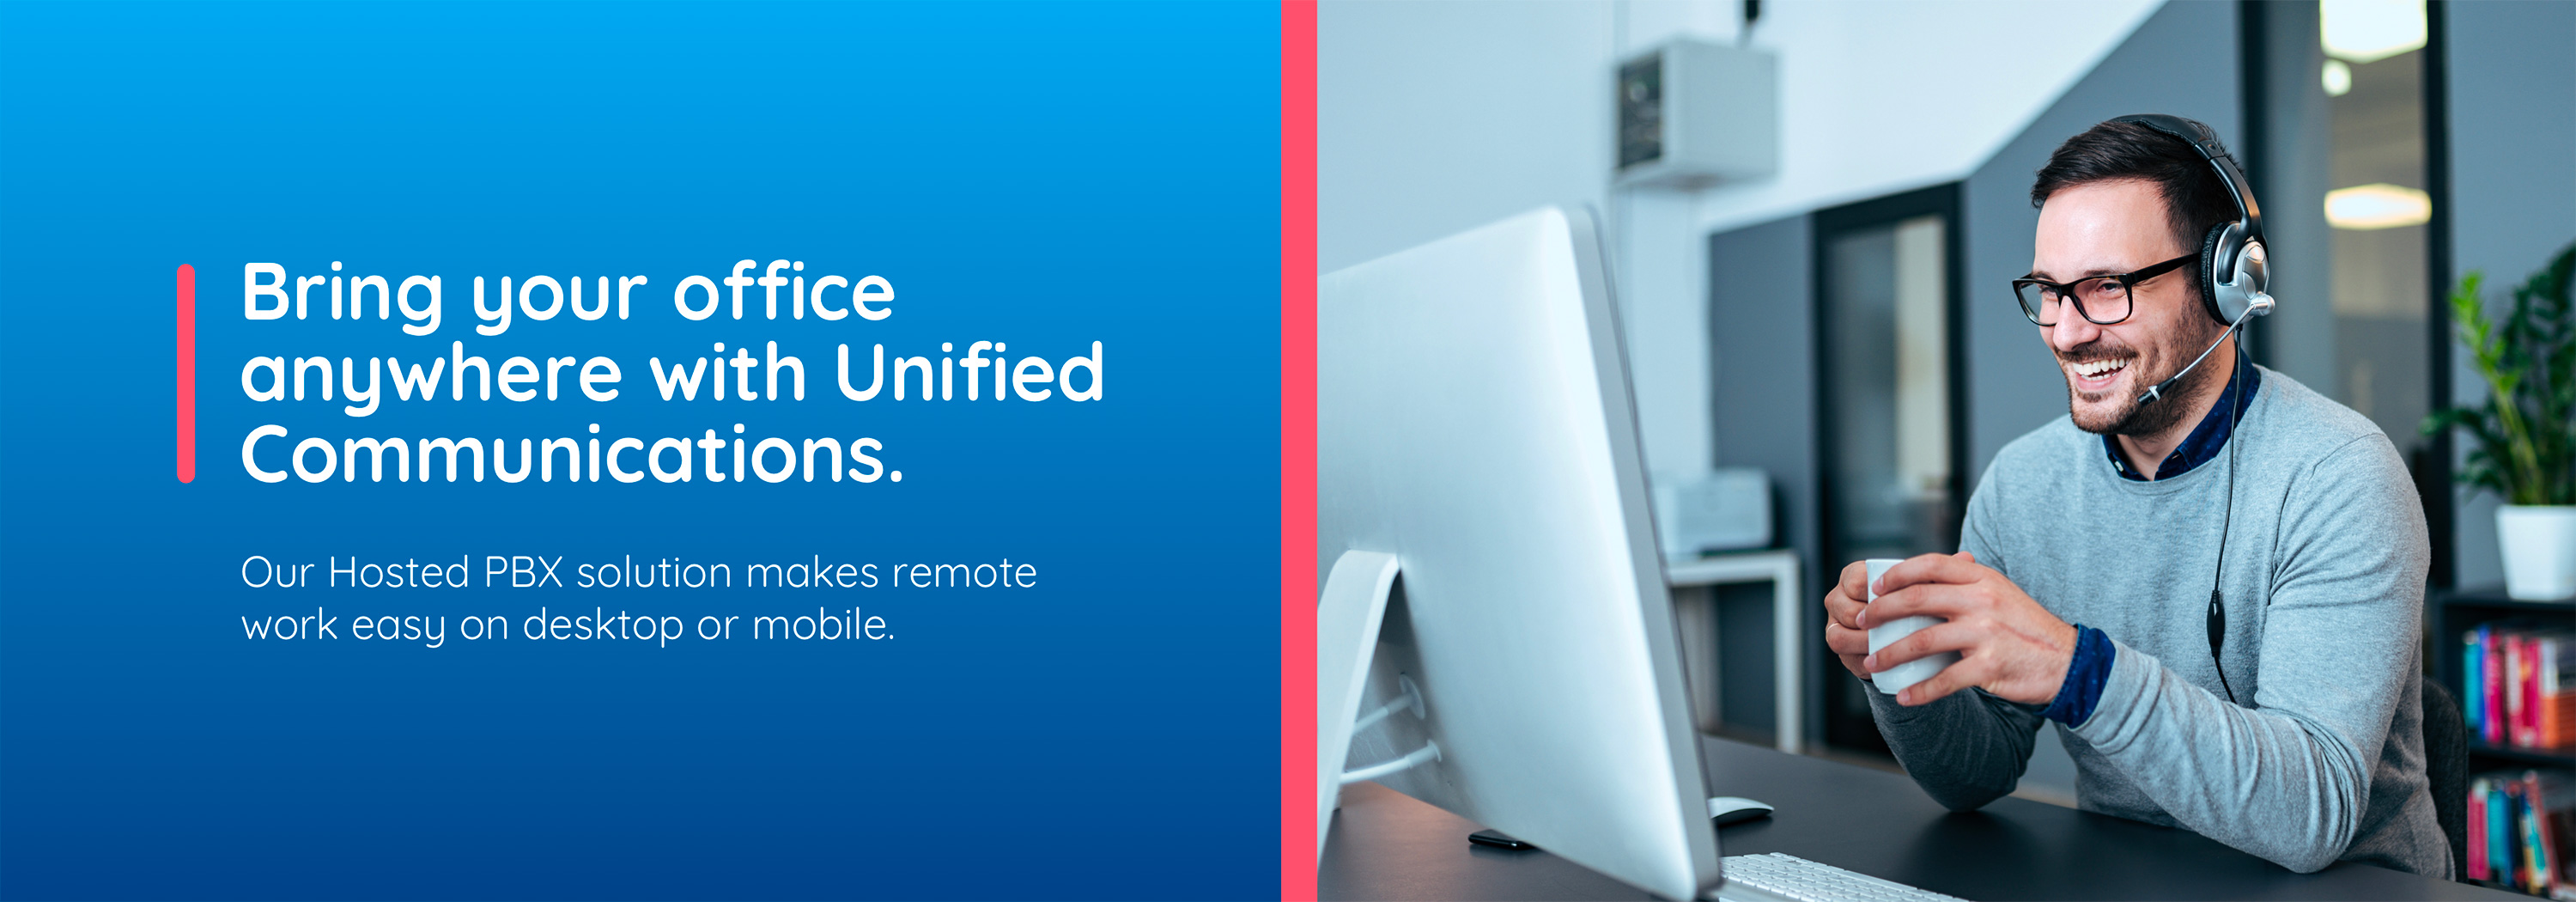 Bring your office anywhere with Unified Communications. Our Hosted PBX solution makes remote work easy on desktop or mobile.